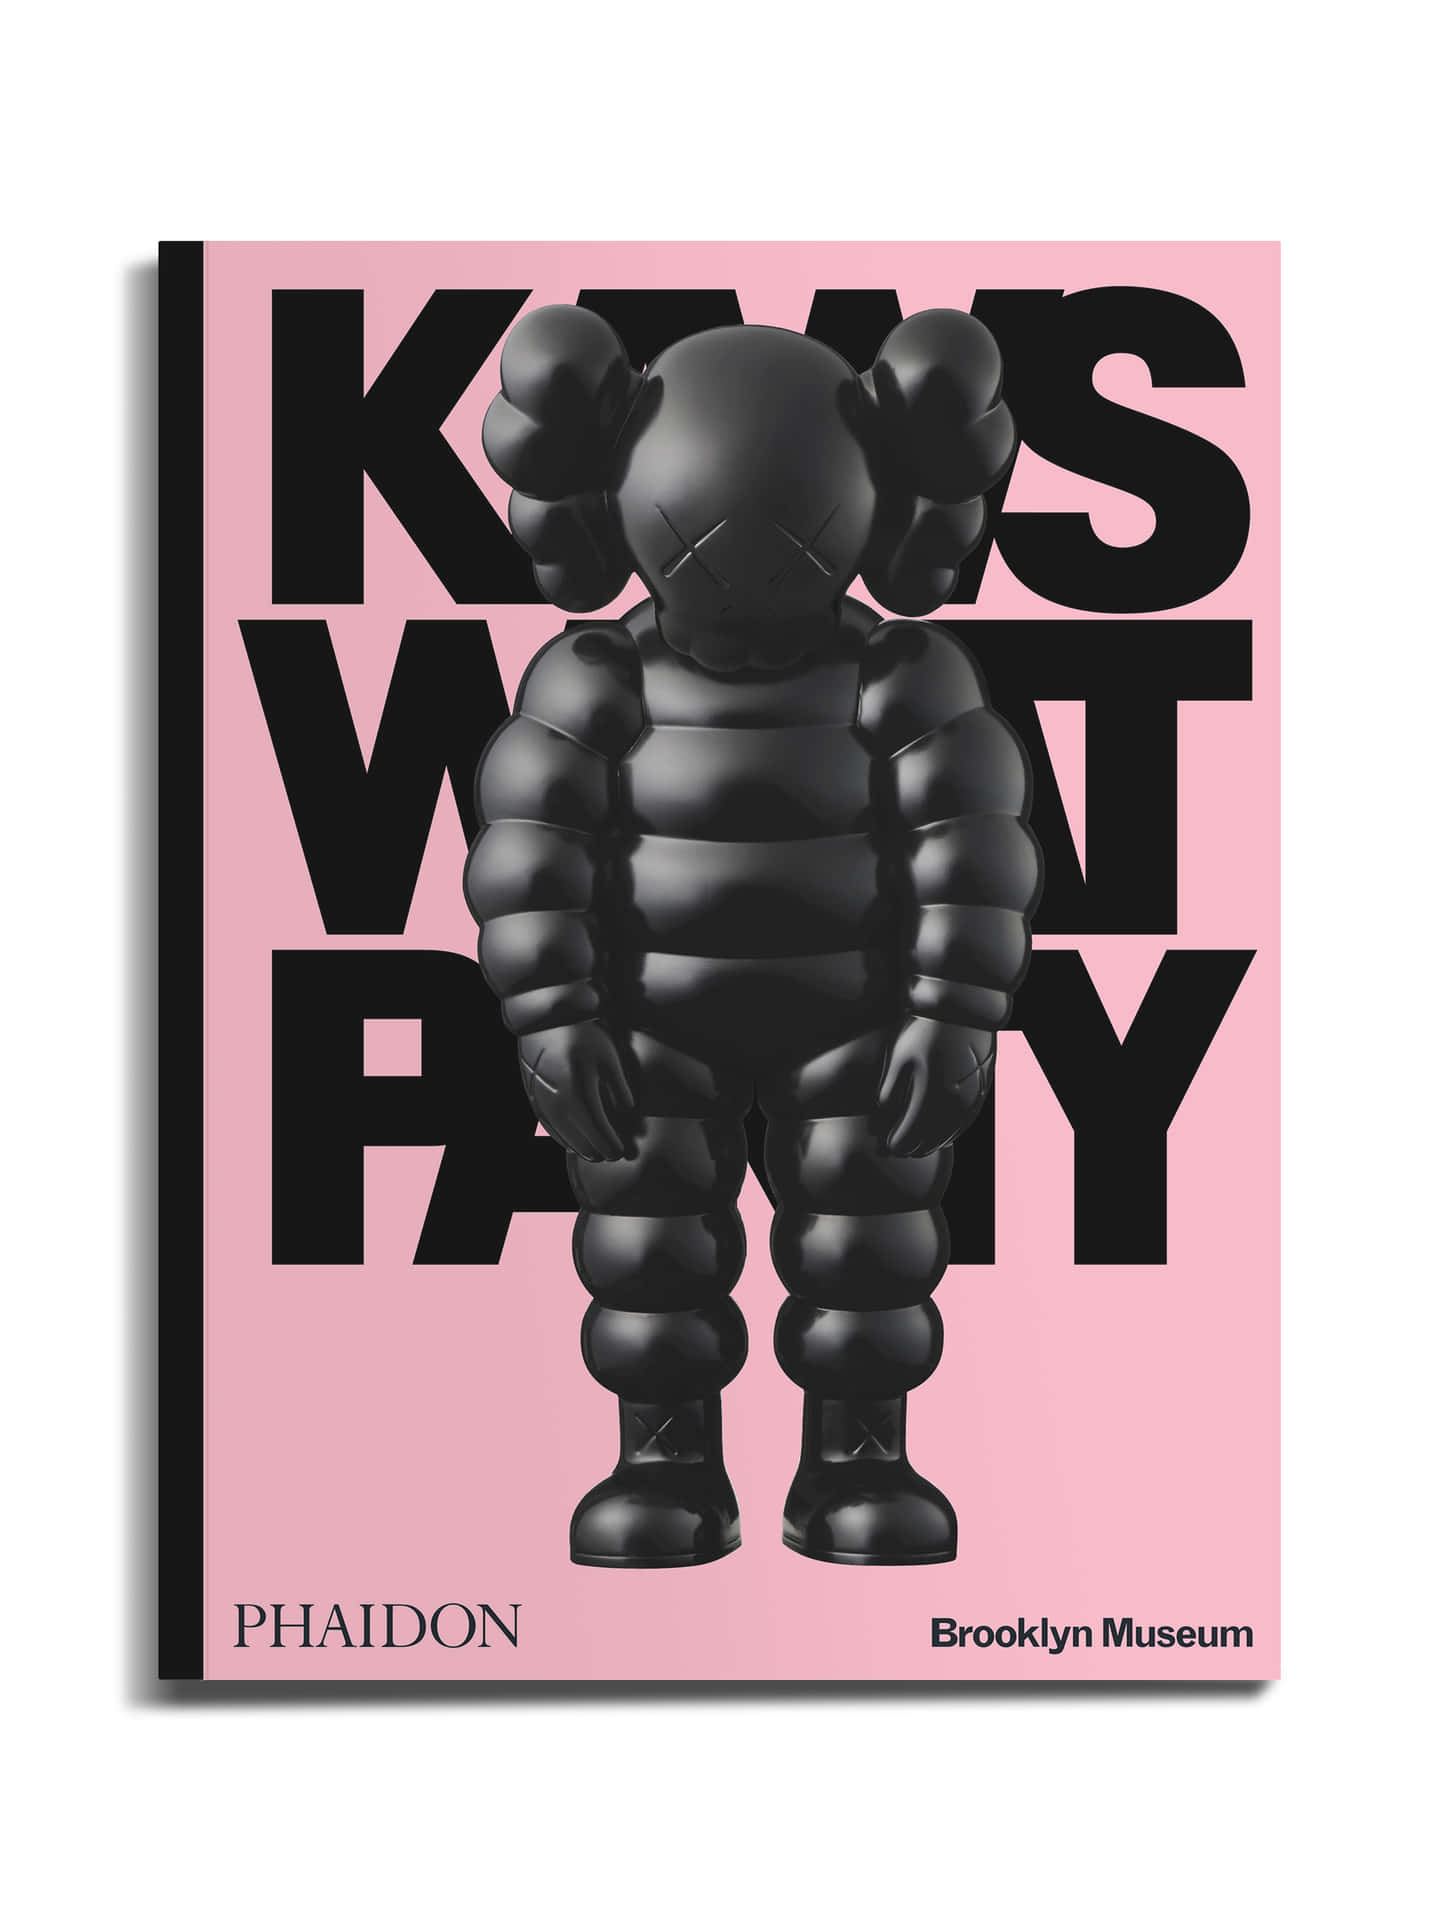 The Iconic Artwork of KAWS